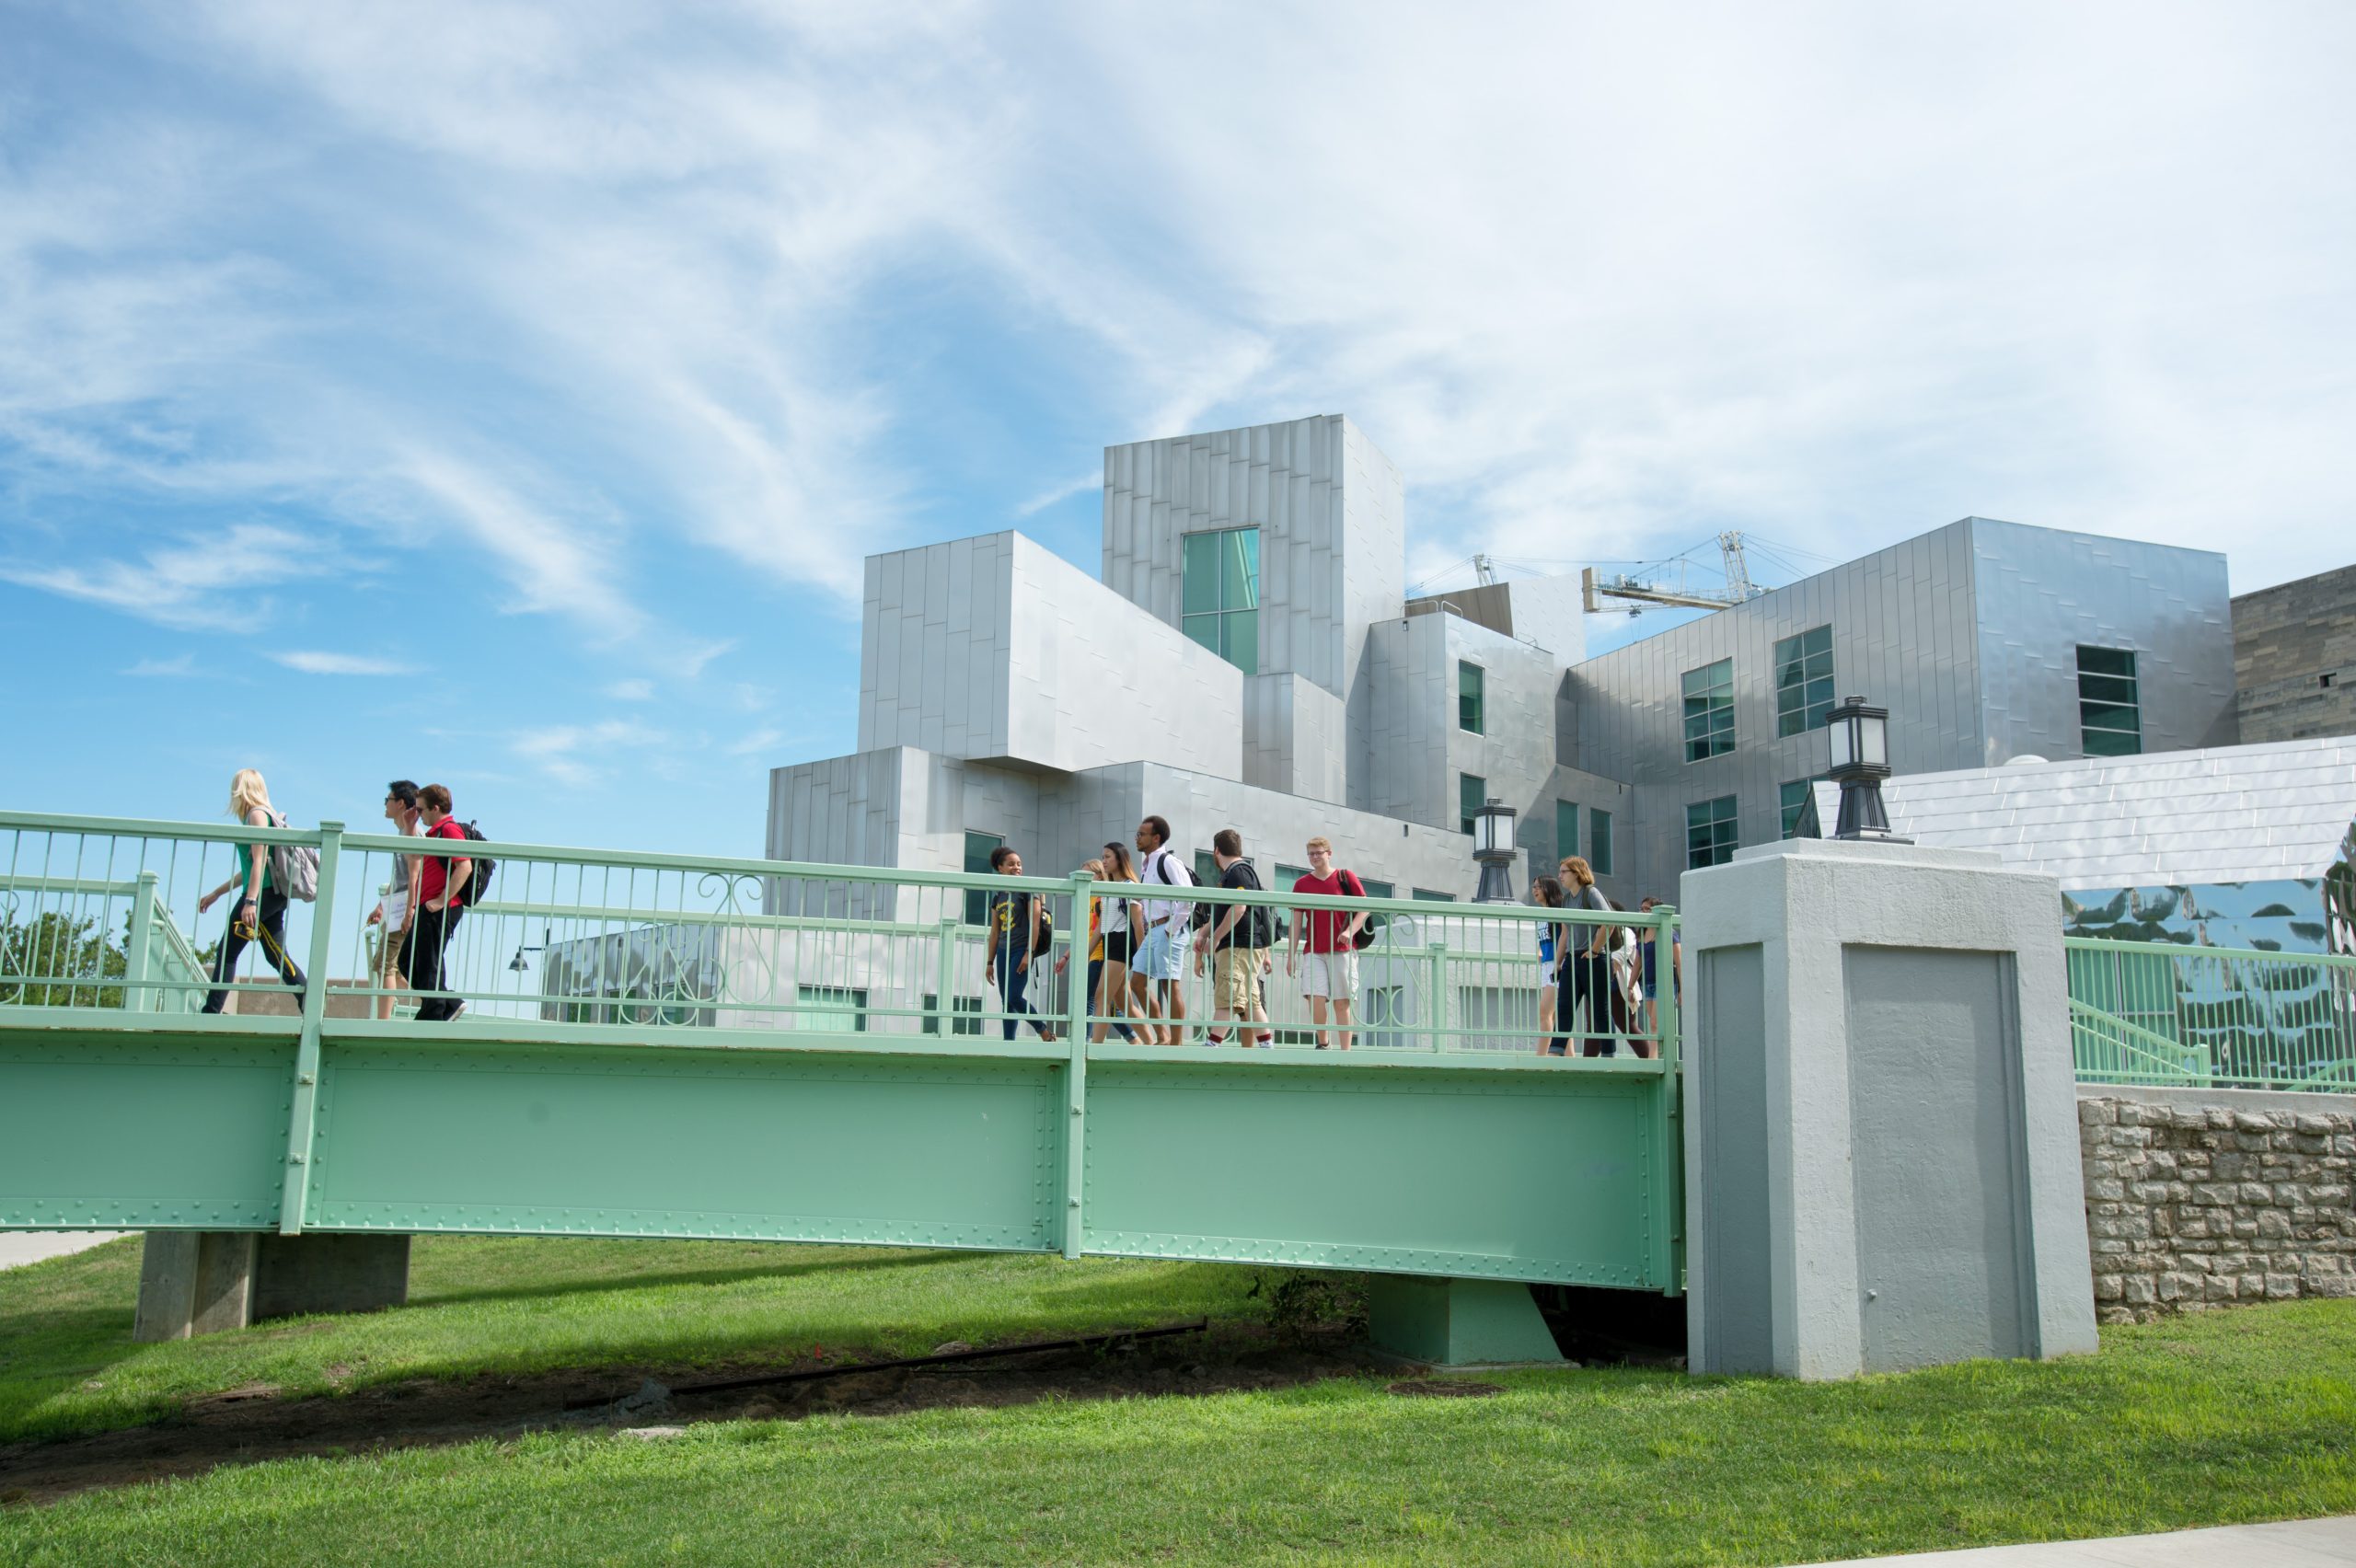 A group of young people crossing a green bridge over the Iowa River in downtown Iowa City. In the background is blue sky and a cluster of silver buildings.